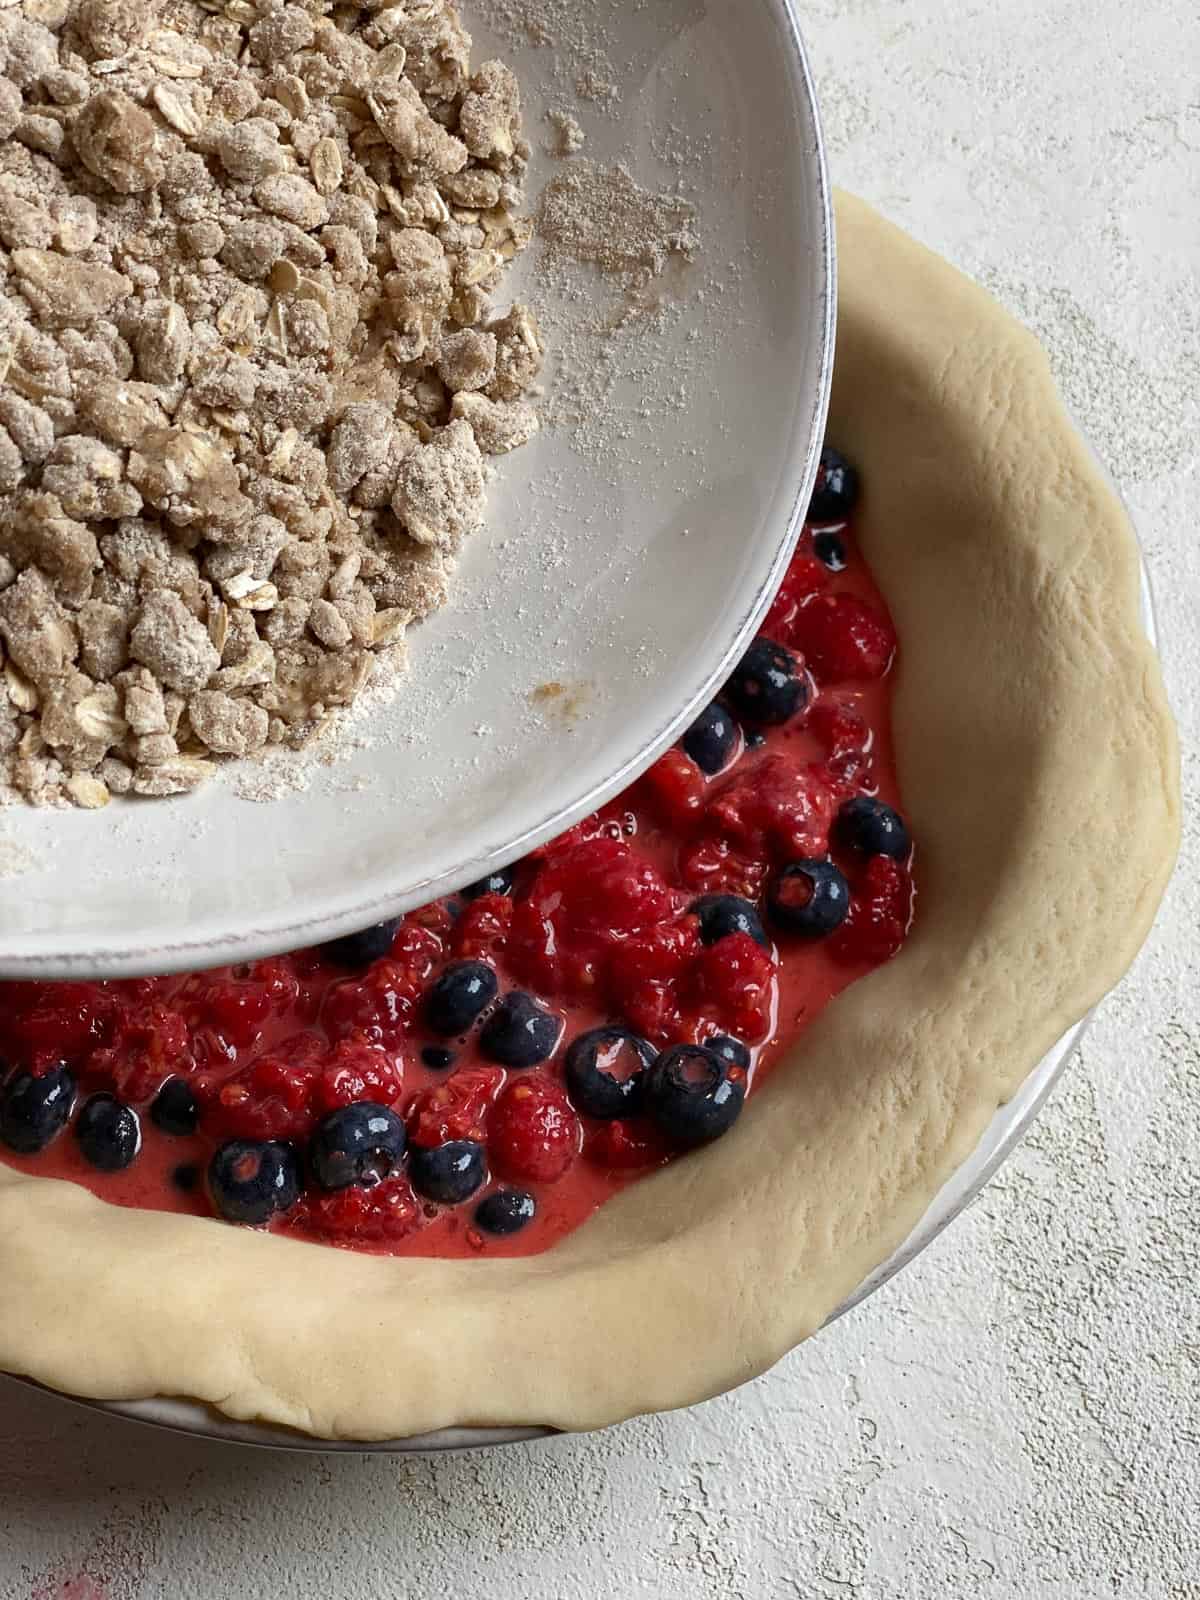 process of adding crumb topping on top of berry mixture